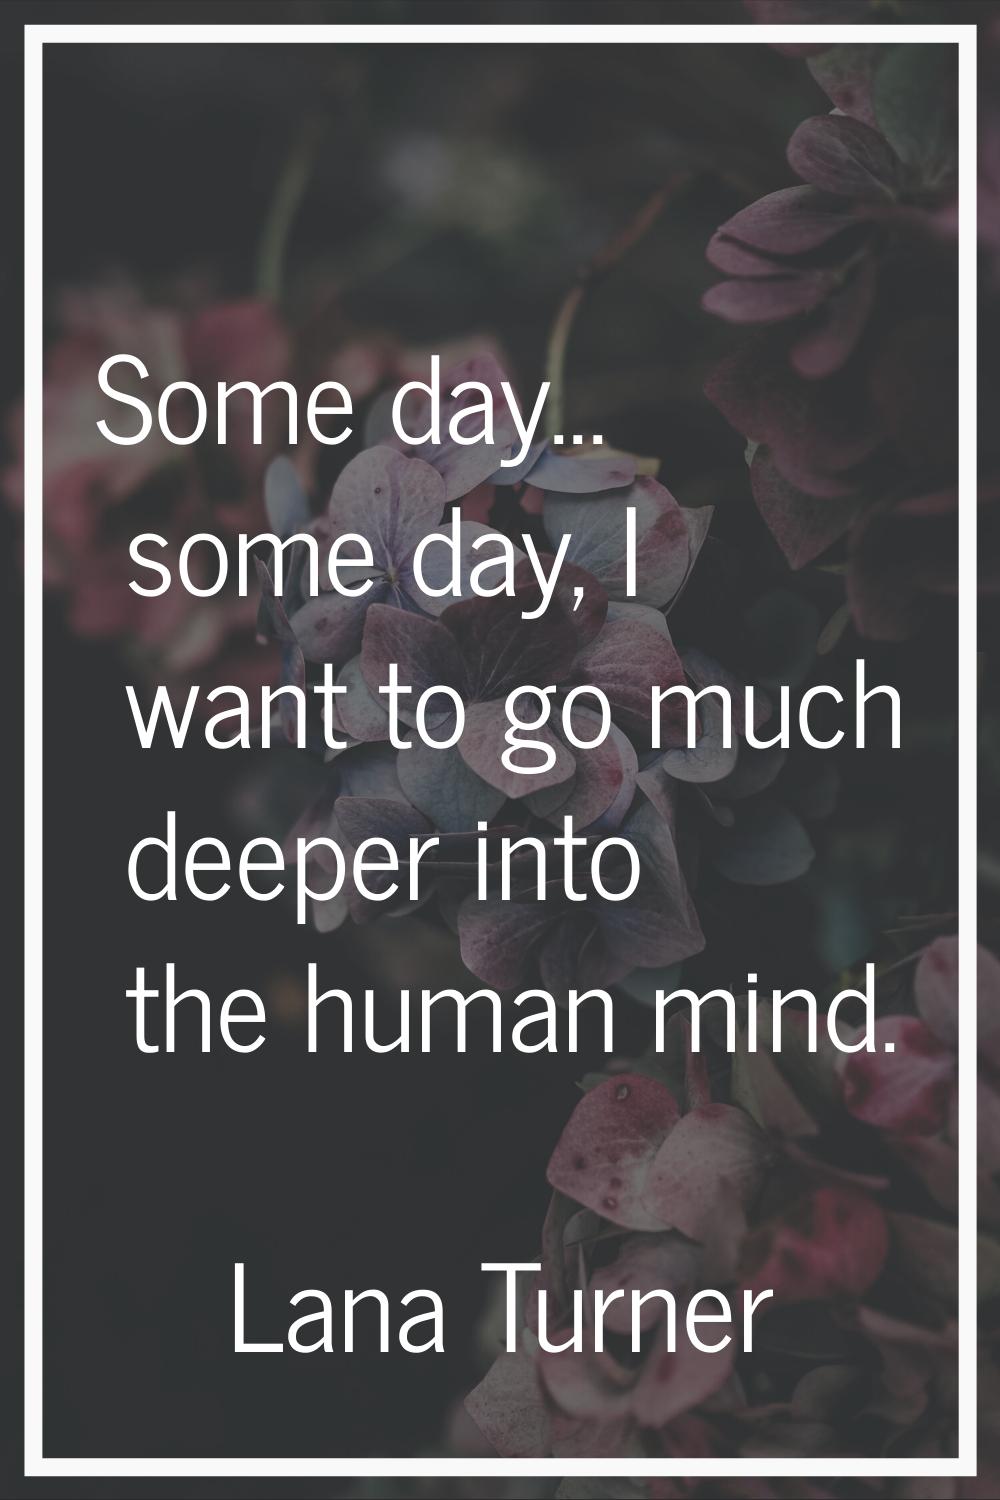 Some day... some day, I want to go much deeper into the human mind.